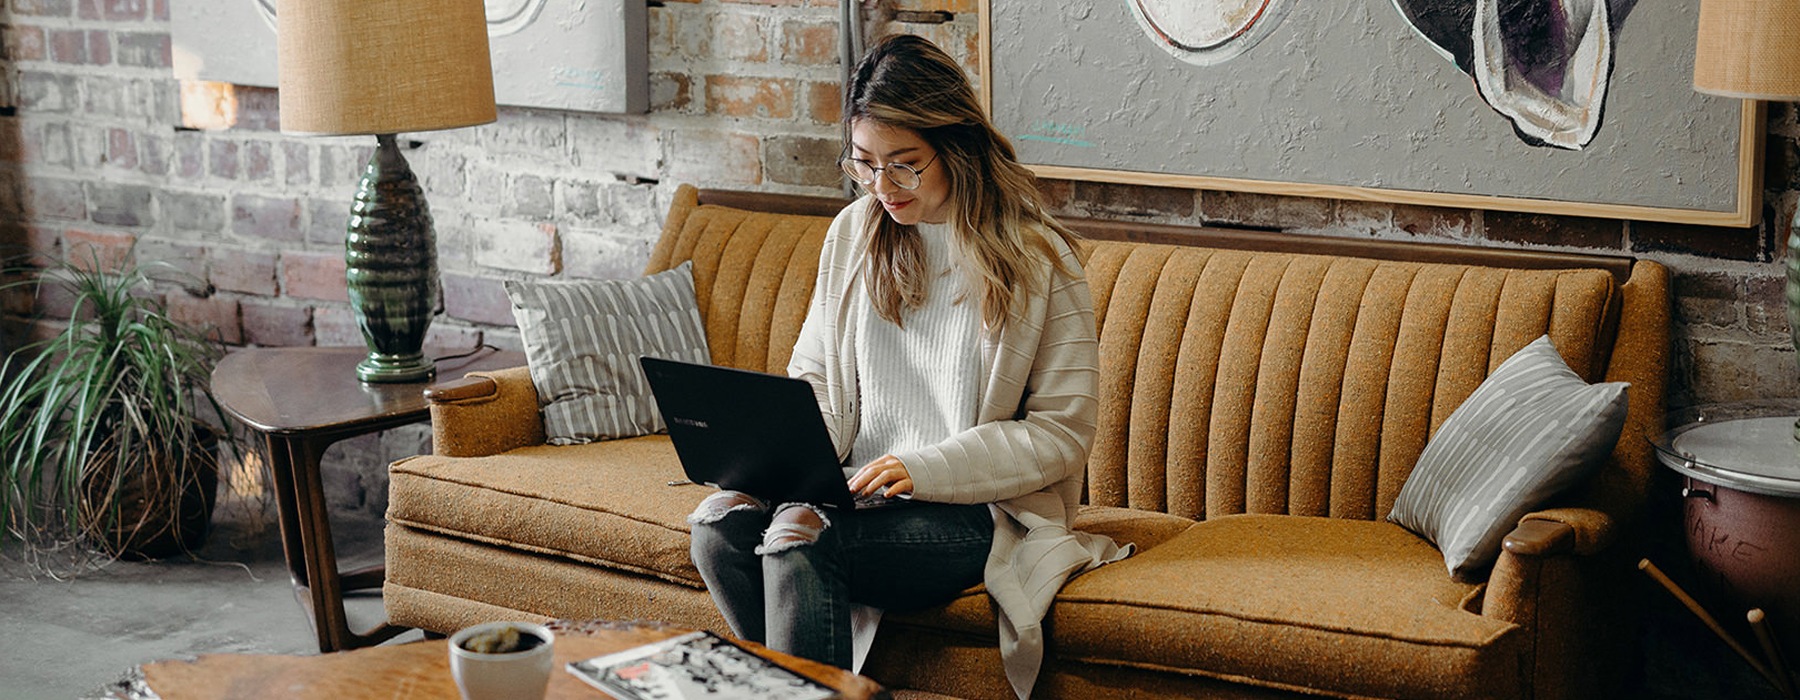 Woman on couch working on laptop